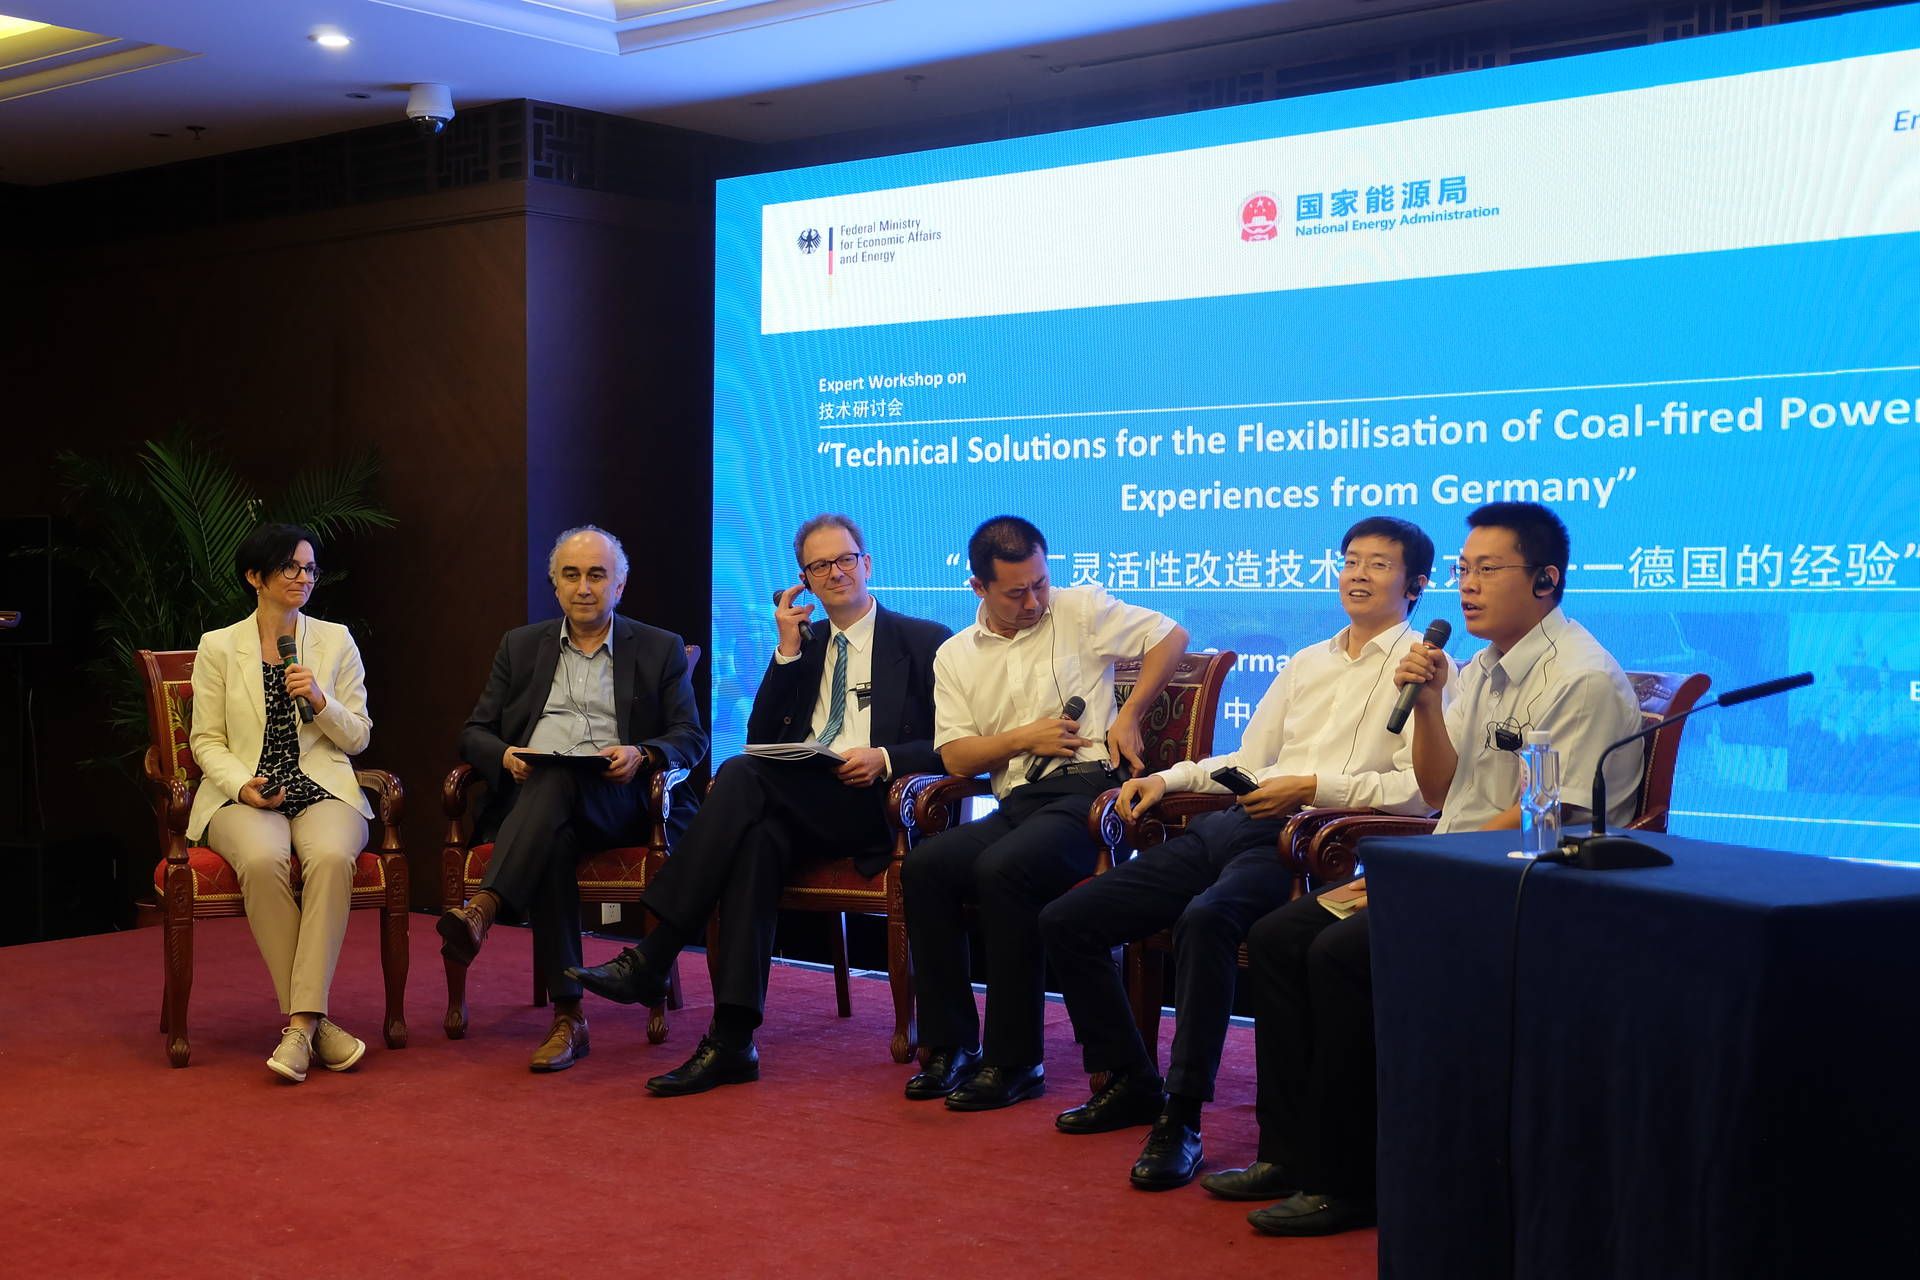 Panel discussion at the expert workshop “Flexibilizing Coal-Fired Power Plants”